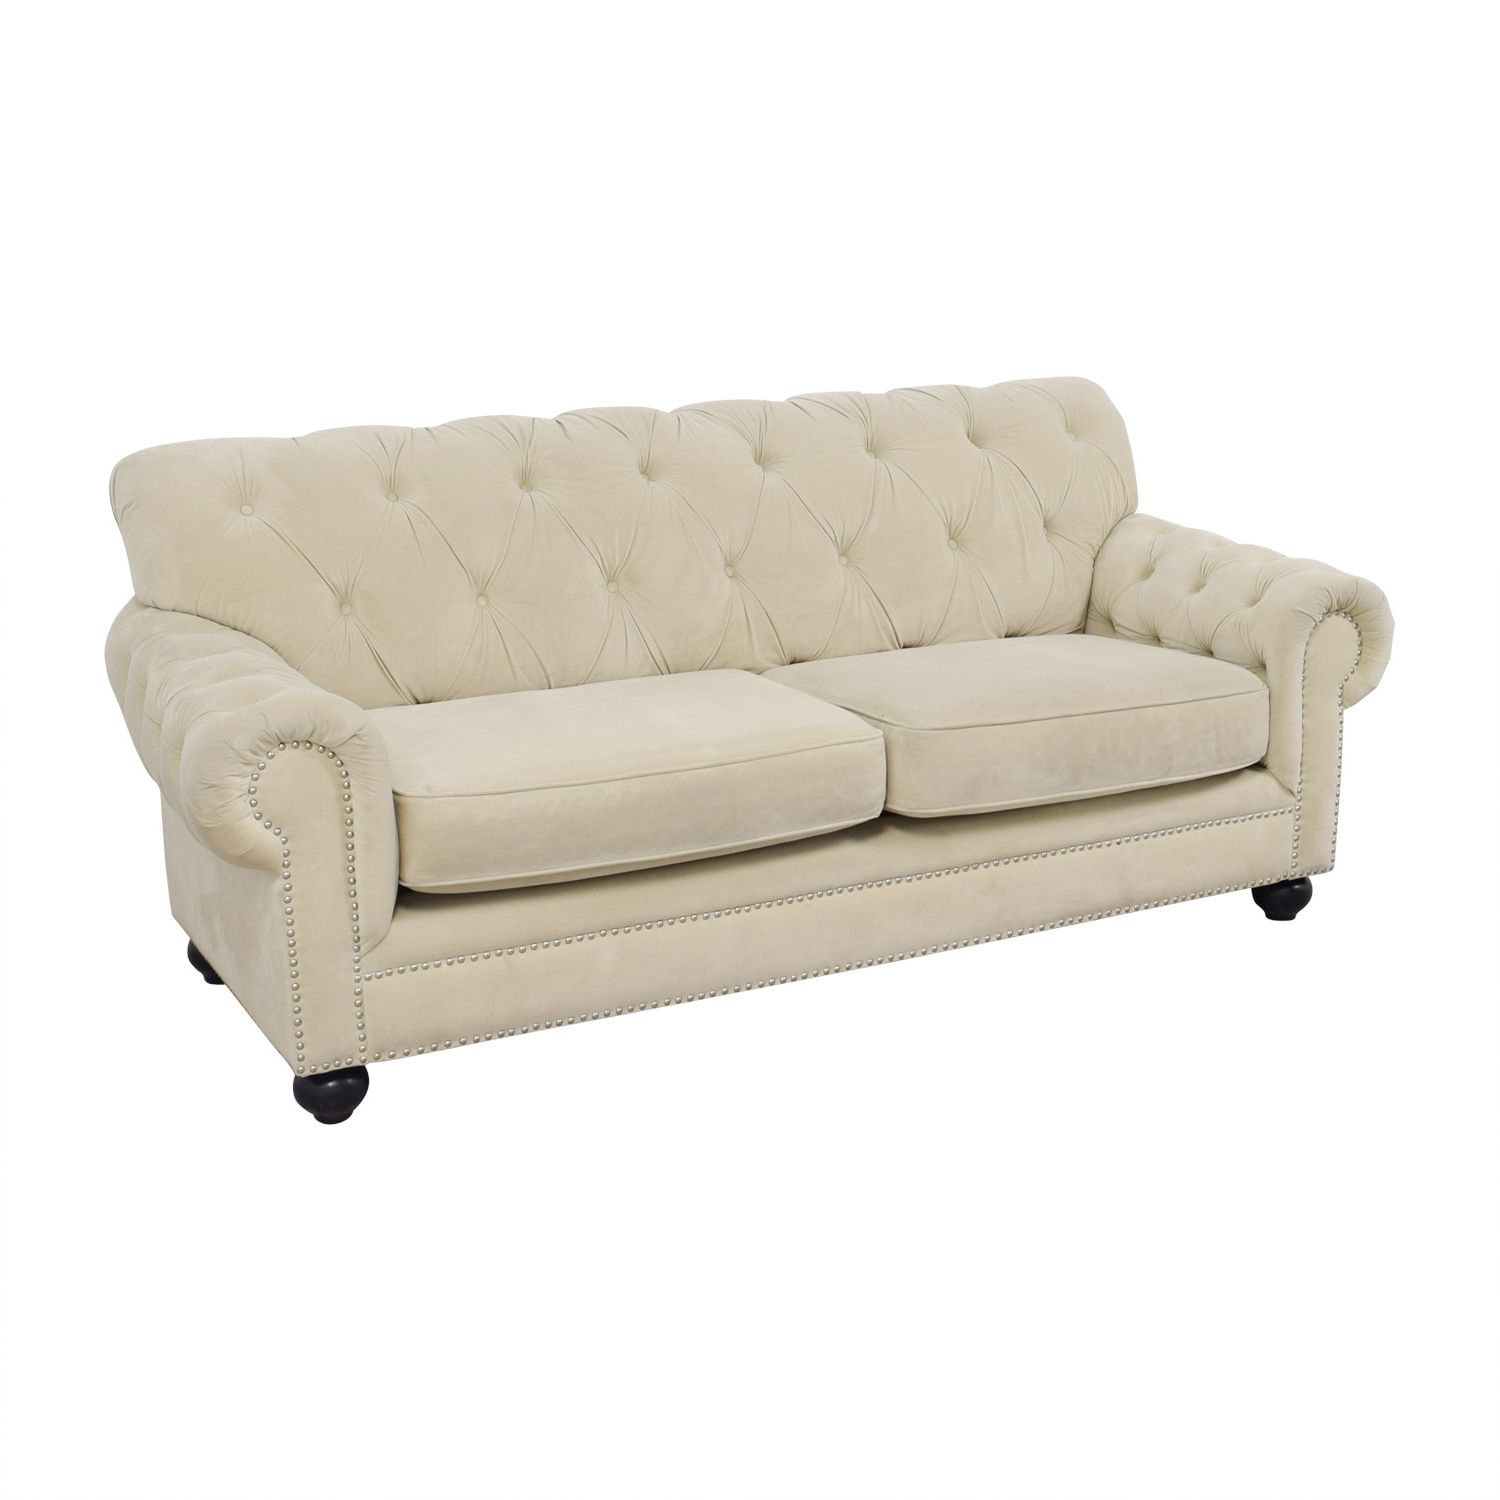 [%88% Off – Chesterfield Style Tufted Beige Velvet Sofa / Sofas With Regard To Latest Elegant Beige Velvet Sofas|elegant Beige Velvet Sofas Regarding Well Known 88% Off – Chesterfield Style Tufted Beige Velvet Sofa / Sofas|famous Elegant Beige Velvet Sofas With Regard To 88% Off – Chesterfield Style Tufted Beige Velvet Sofa / Sofas|2018 88% Off – Chesterfield Style Tufted Beige Velvet Sofa / Sofas In Elegant Beige Velvet Sofas%] (View 15 of 15)